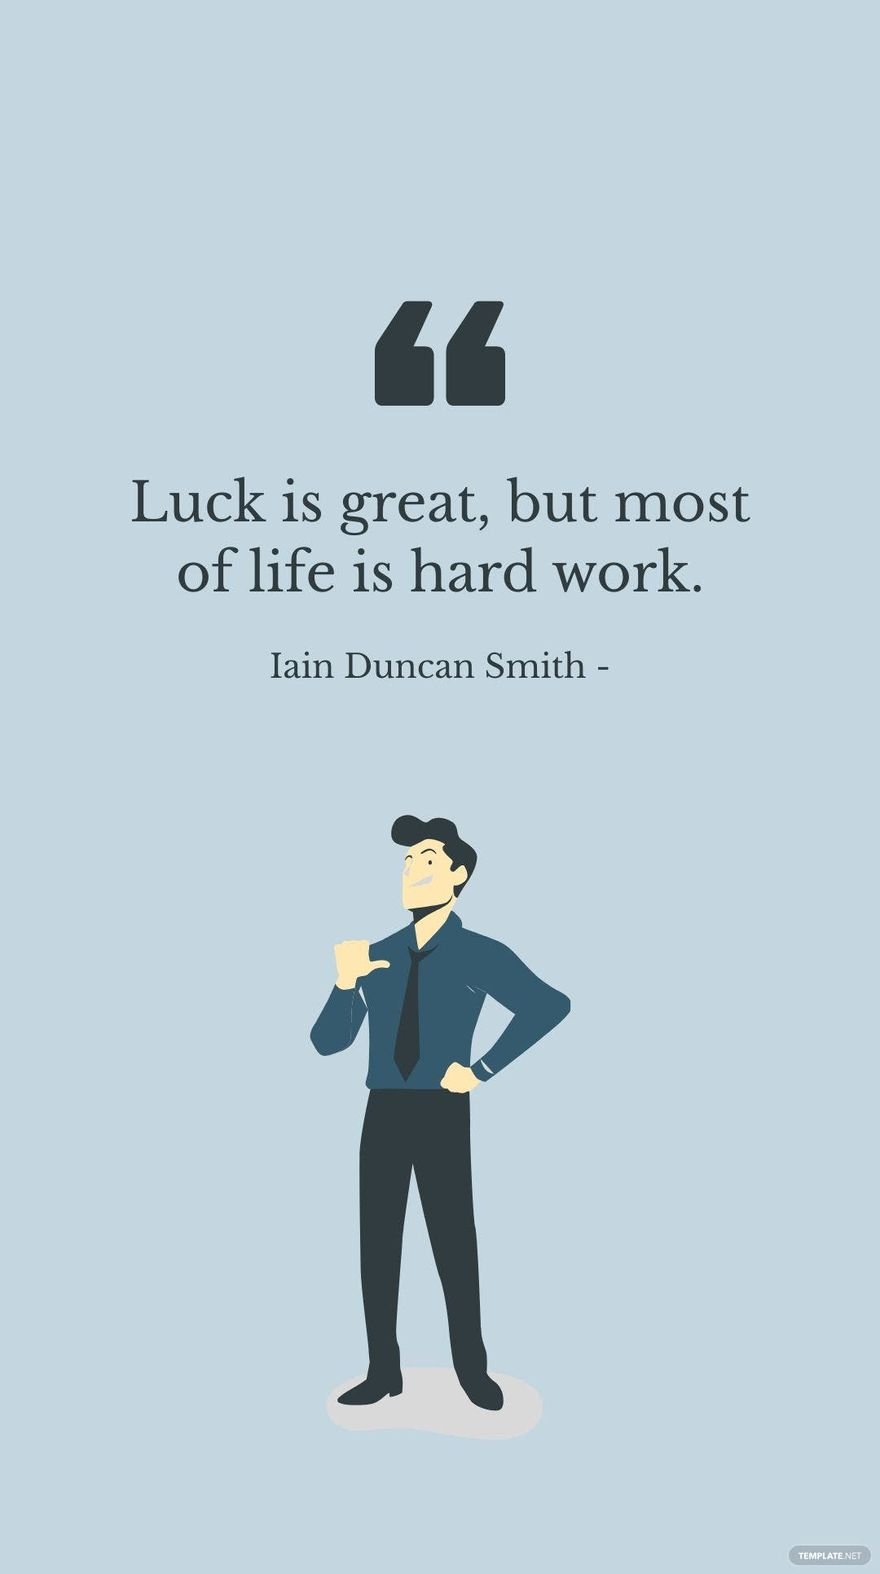 Iain Duncan Smith - Luck is great, but most of life is hard work.